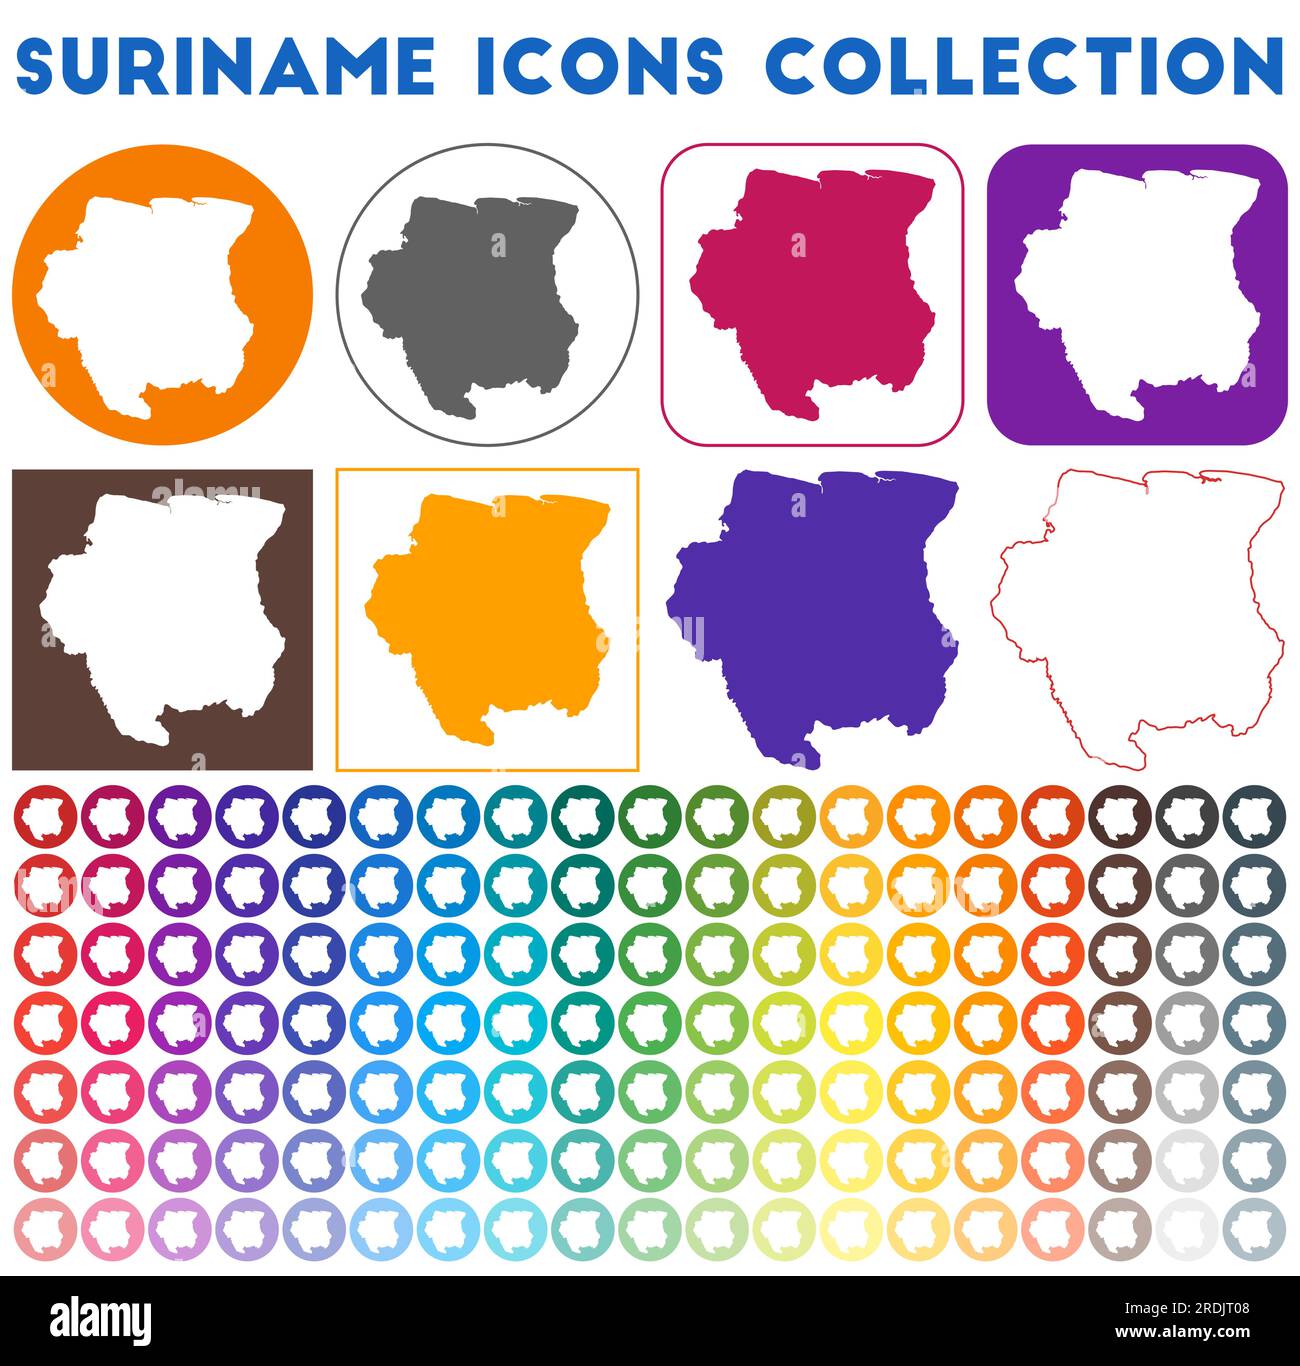 Suriname icons collection. Bright colourful trendy map icons. Modern Suriname badge with country map. Vector illustration. Stock Vector